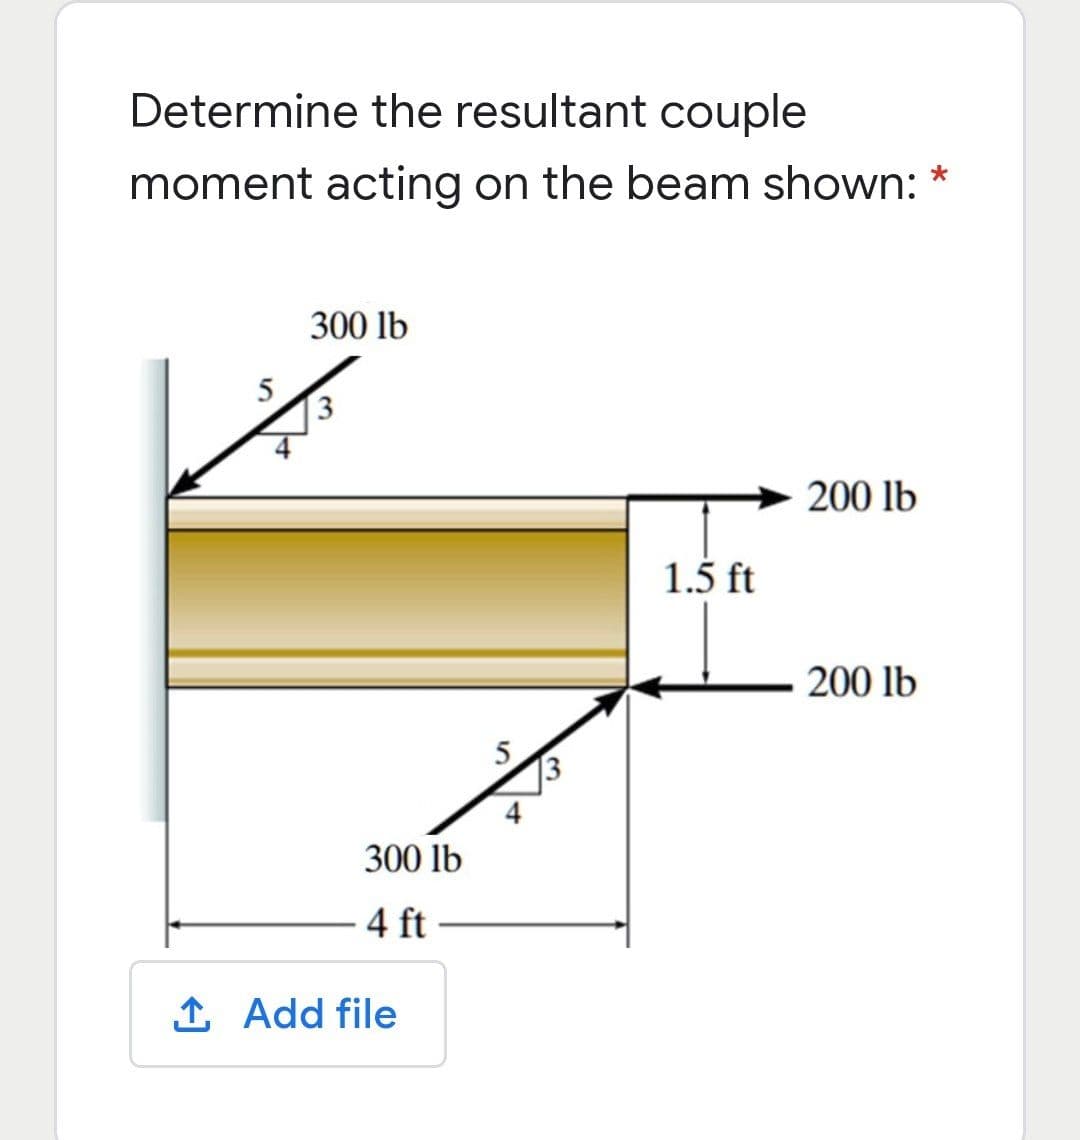 Determine the resultant couple
moment acting on the beam shown:
300 lb
5
200 lb
1.5 ft
200 lb
13
300 lb
4 ft
1 Add file
